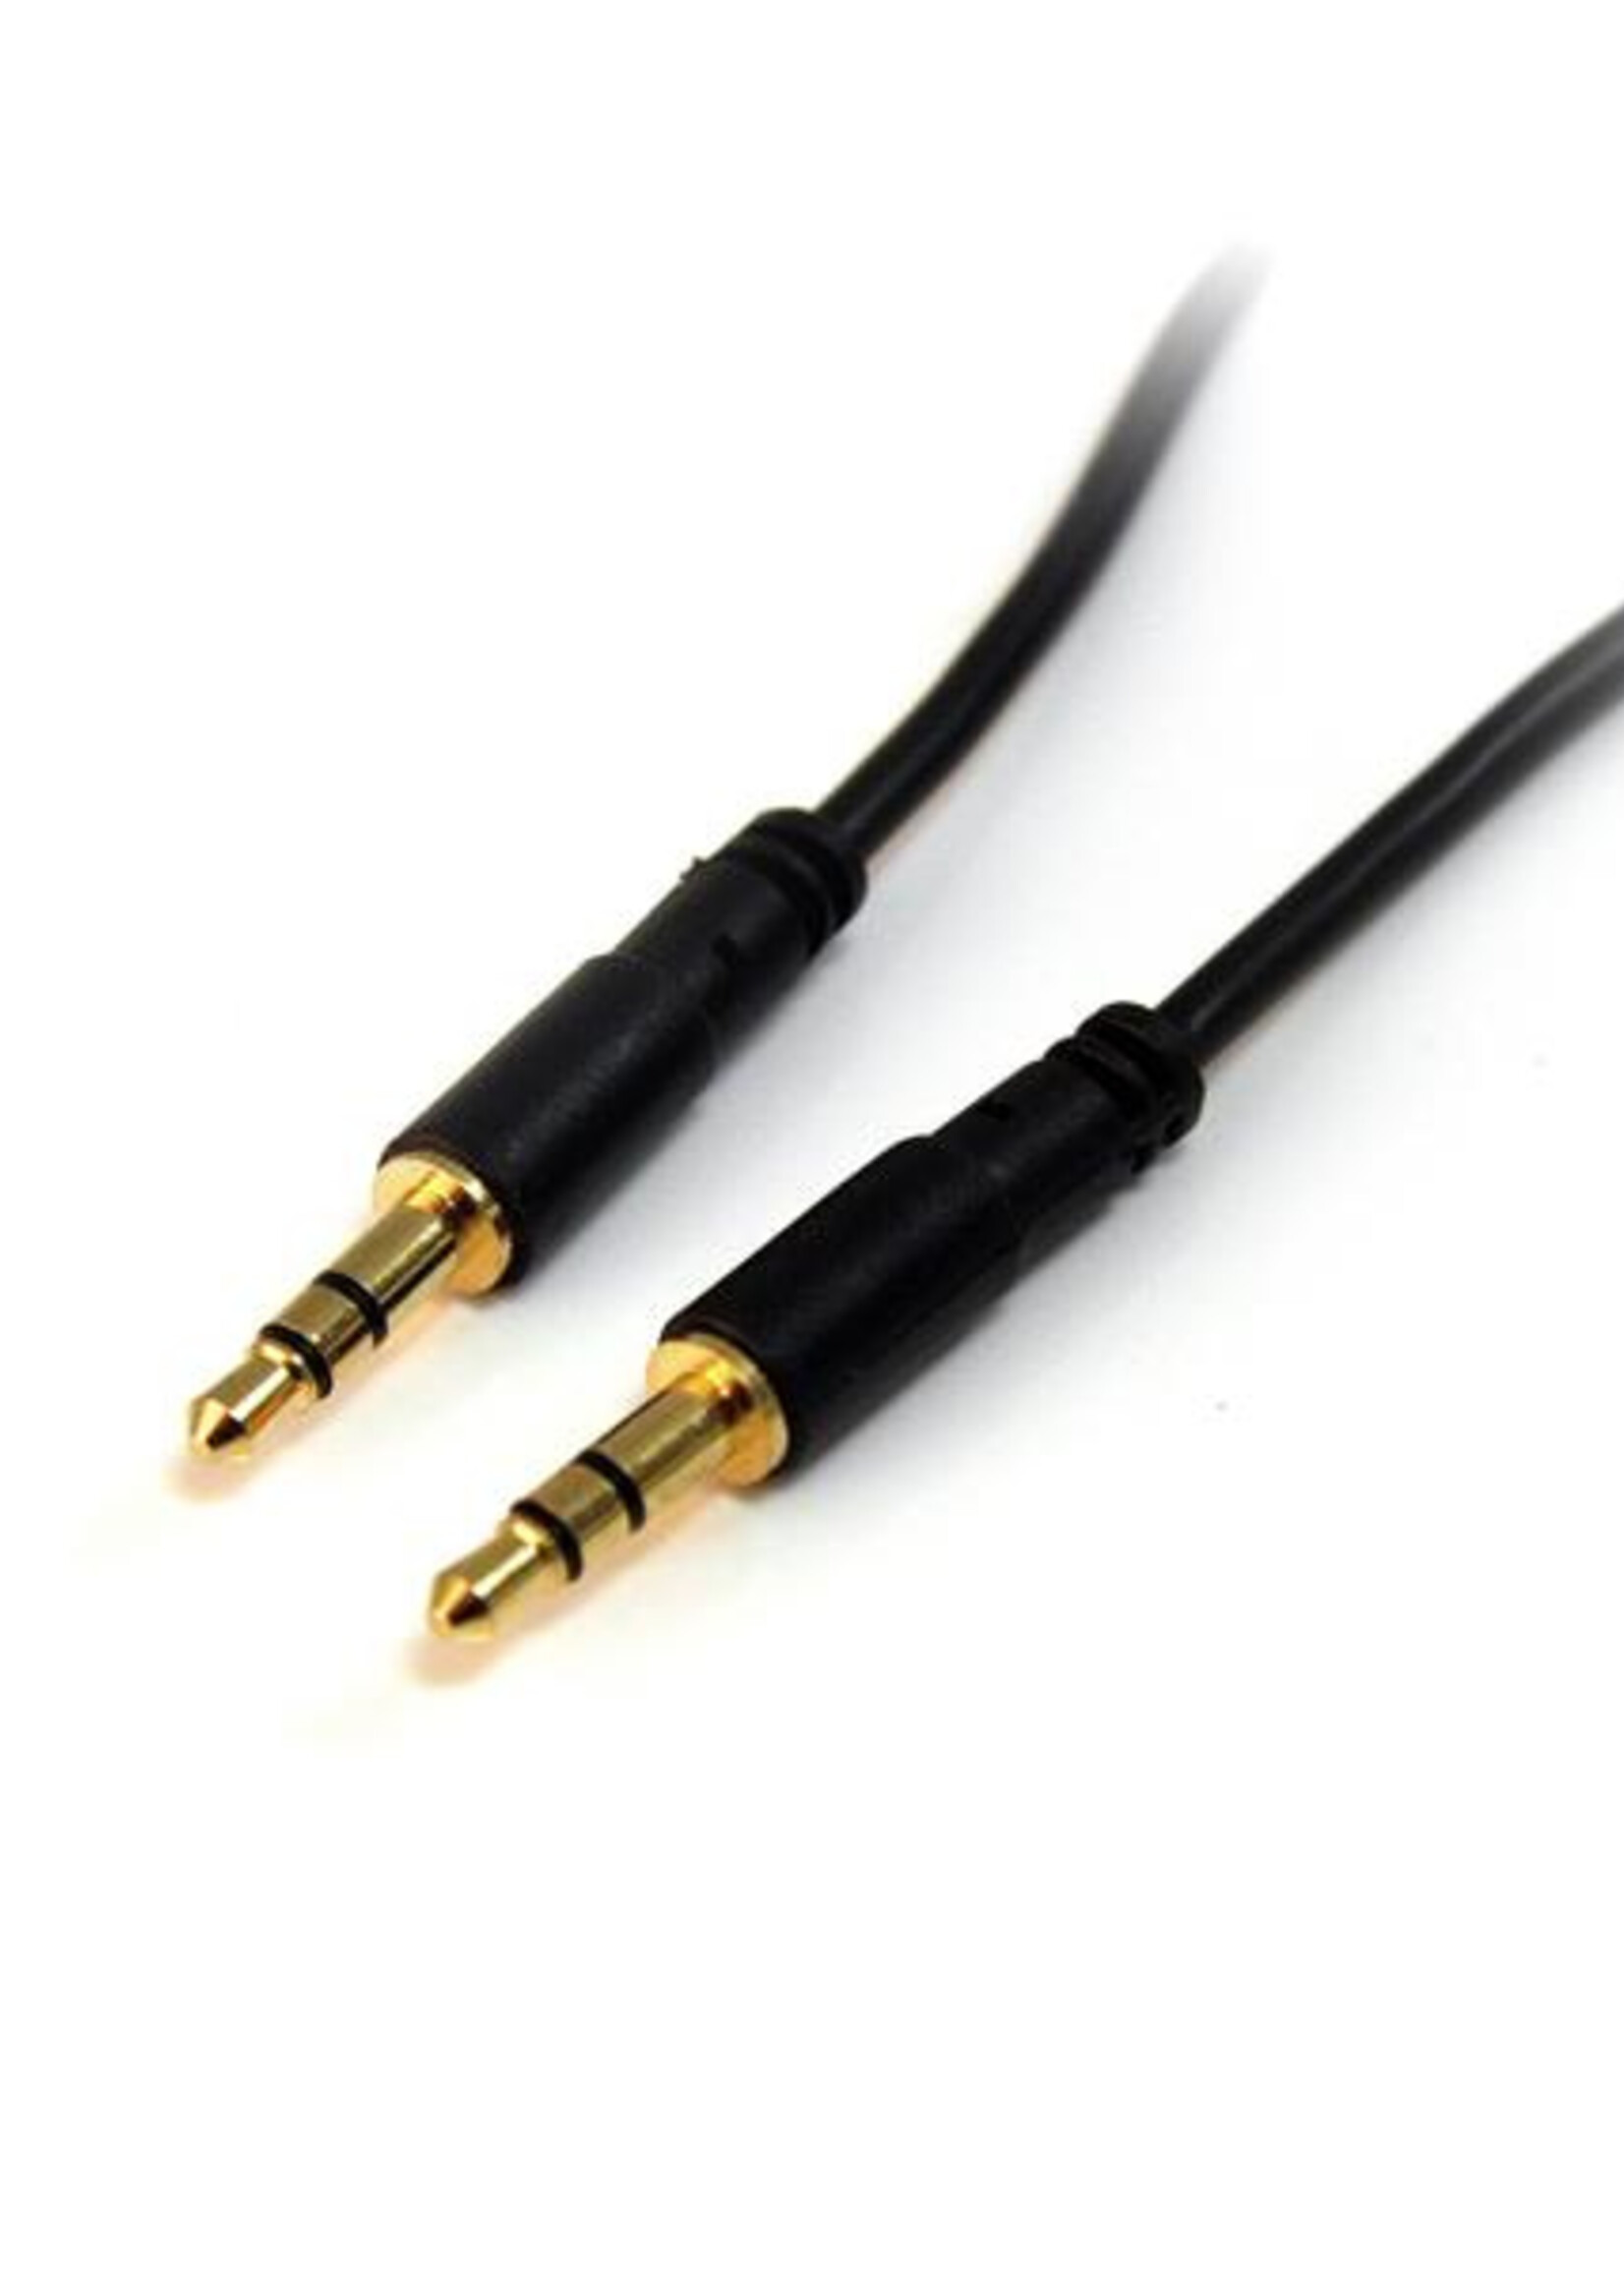 10 ft Slim 3.5mm Stereo Audio Cable M/M